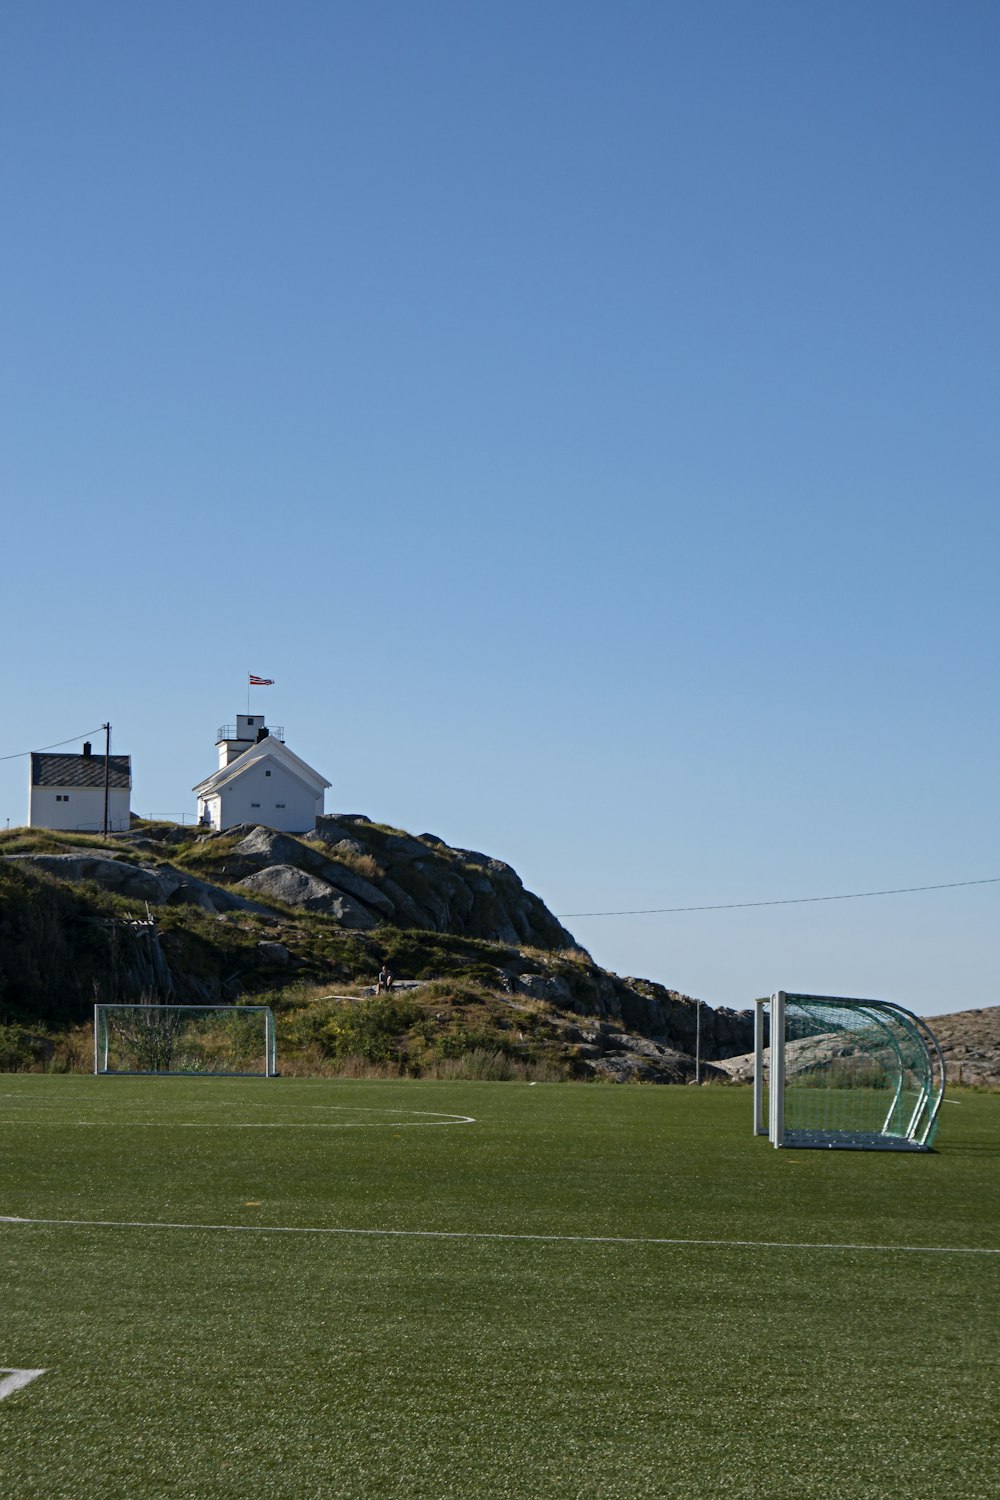 a soccer field with a soccer goal and a lighthouse in the background